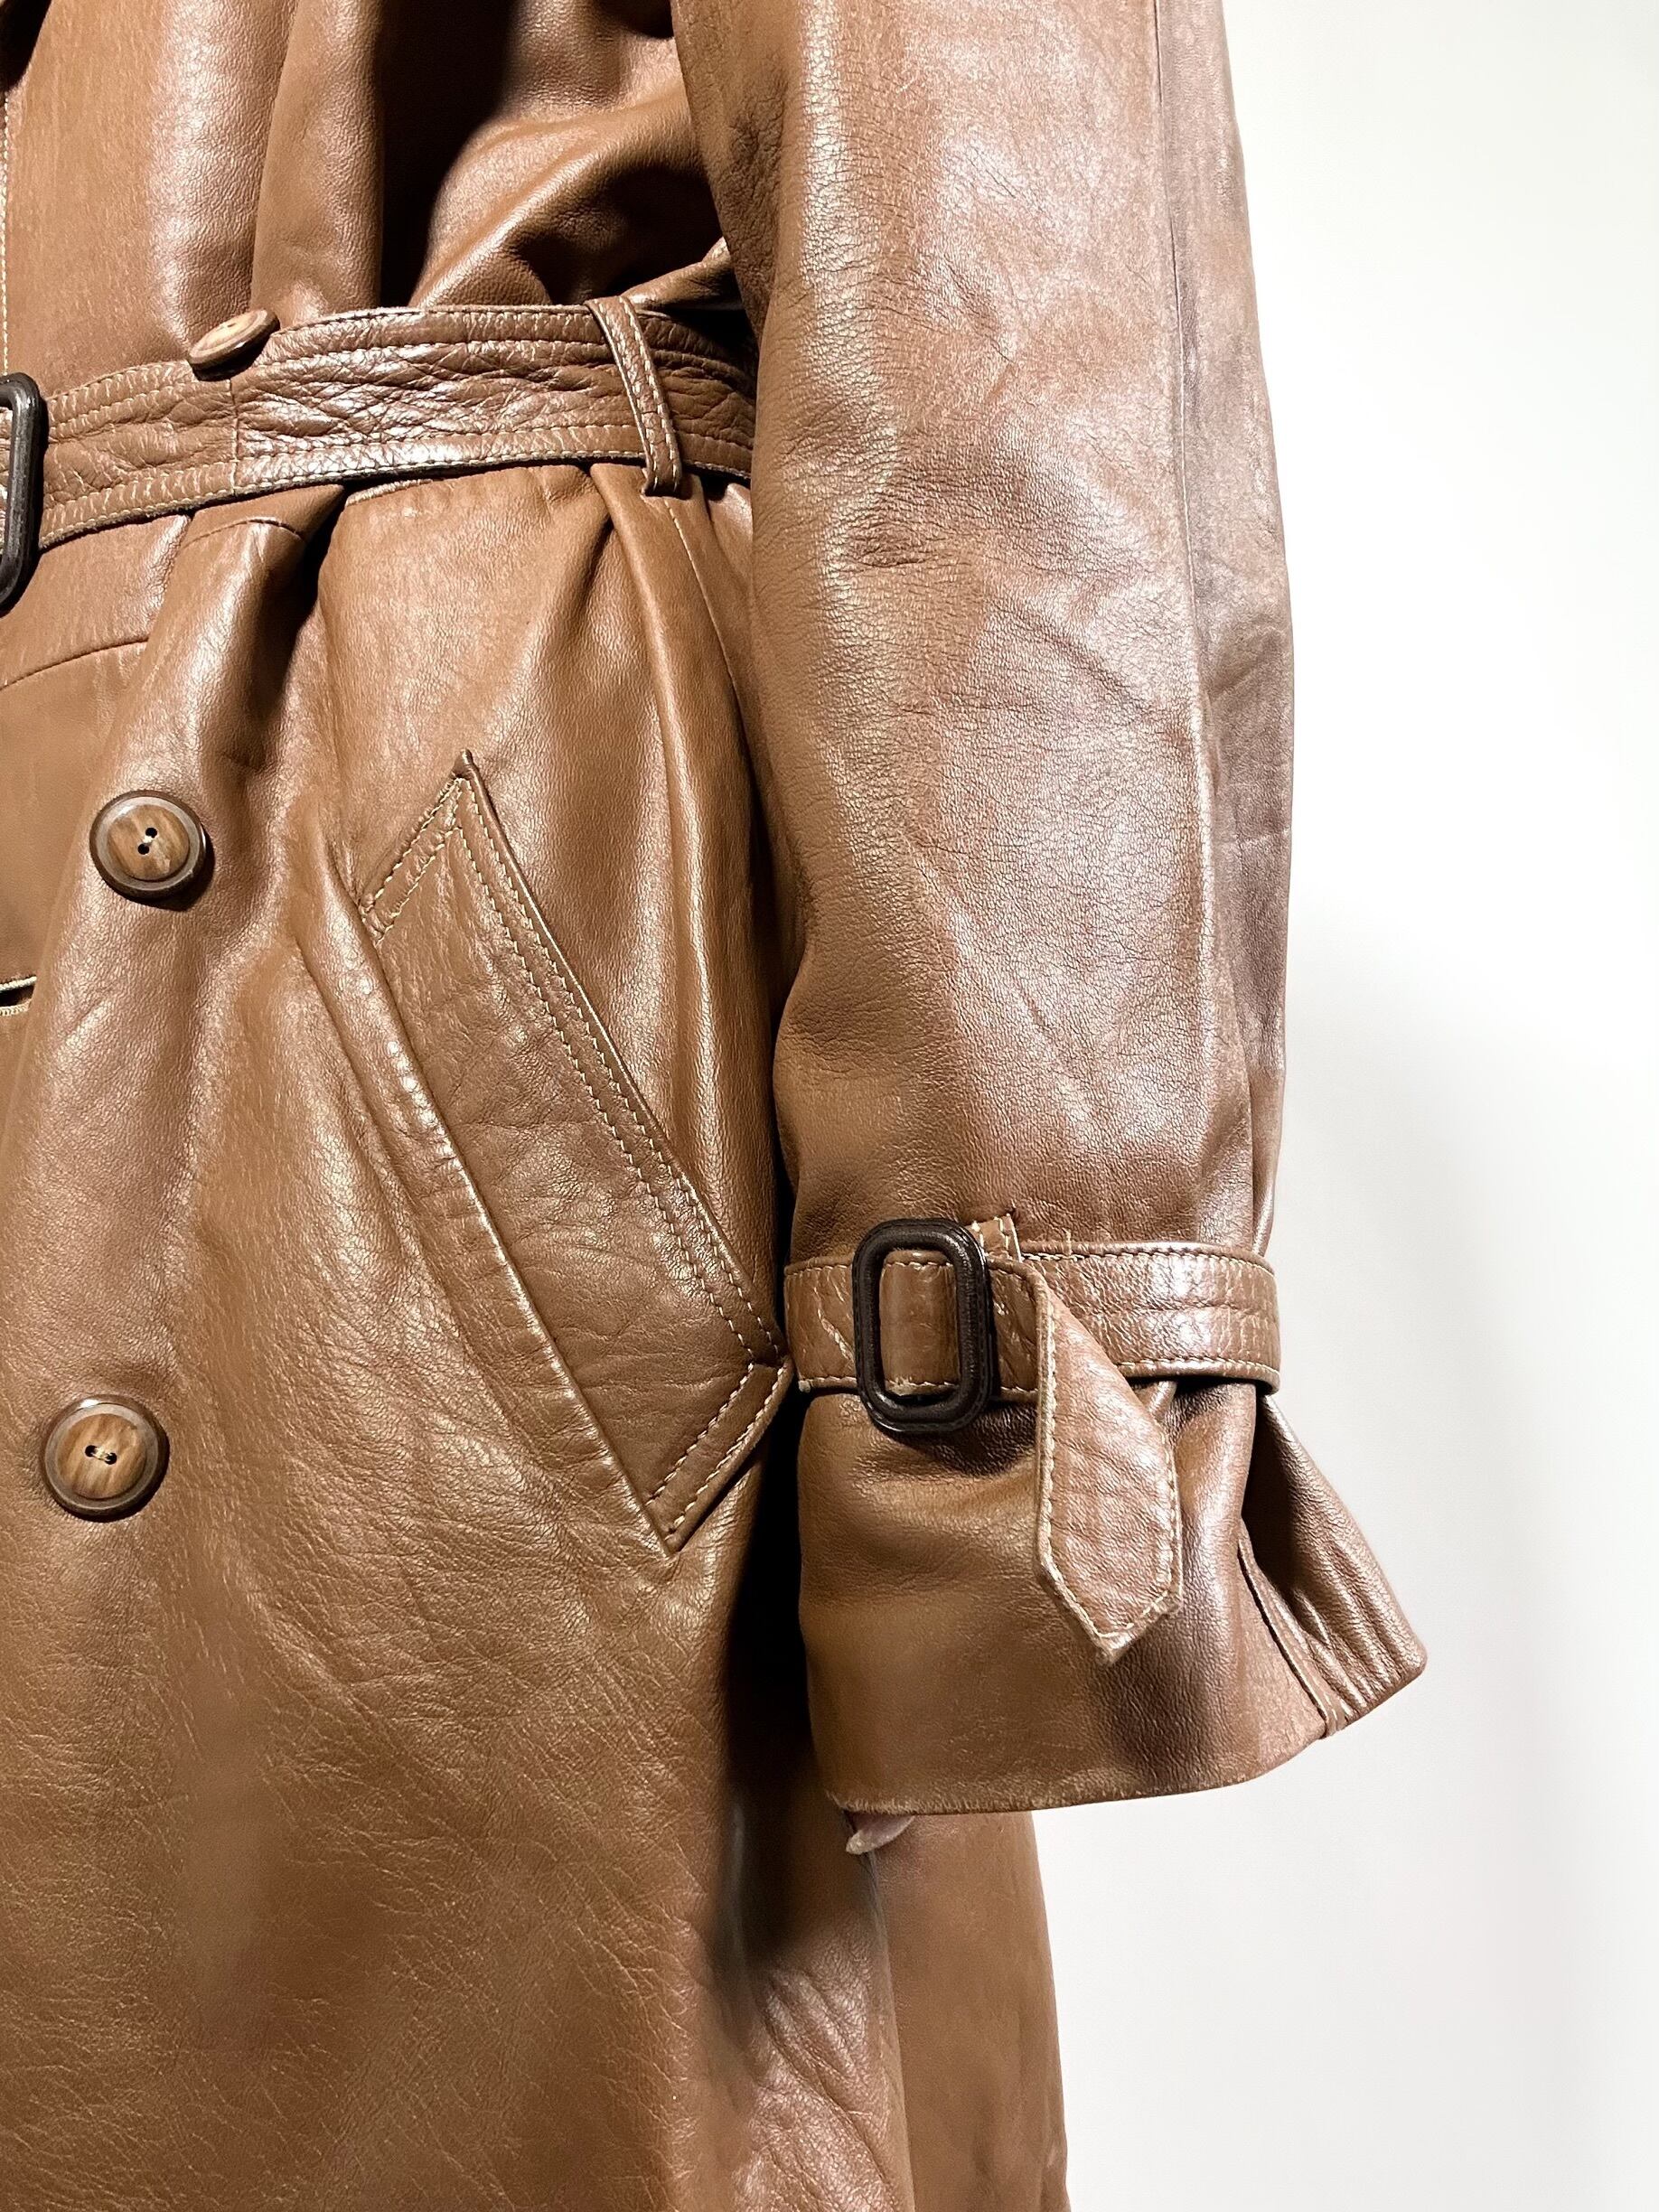 M.I.C CUIR】vintage long leather coat M.I.C CUIR フランス軍 レザー 